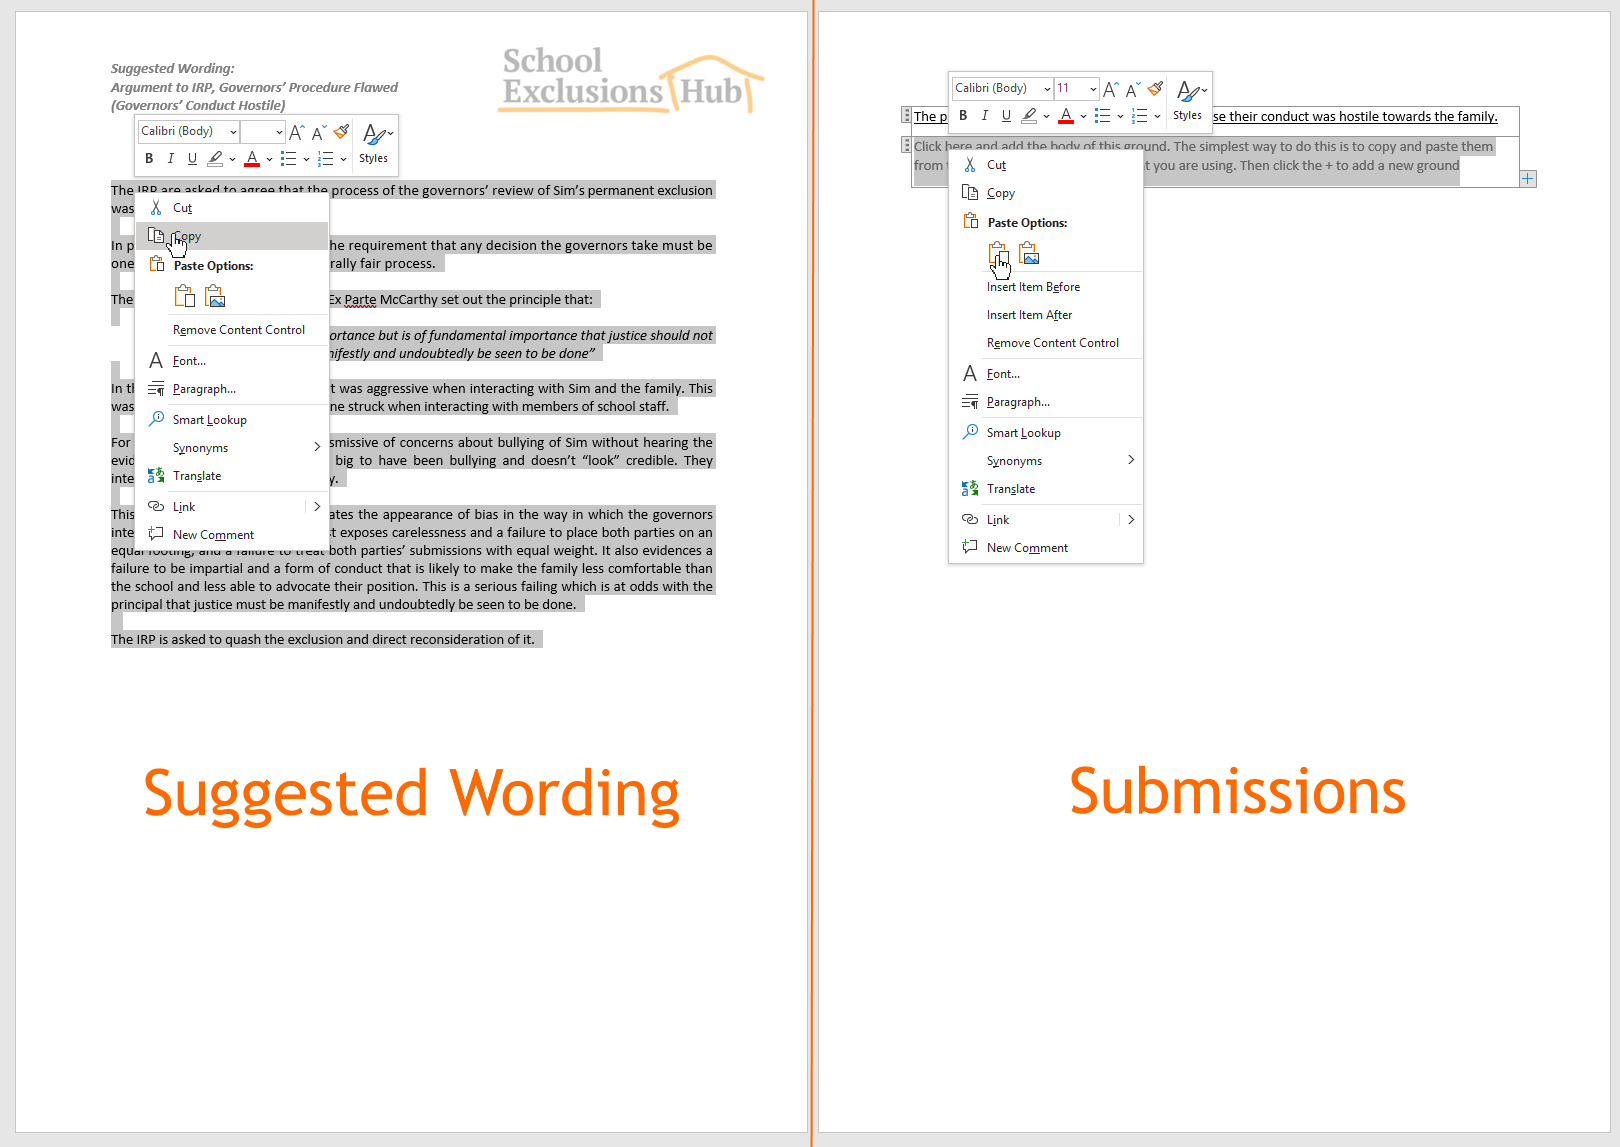 Copy and paste the arguments into the Template Document: Submissions